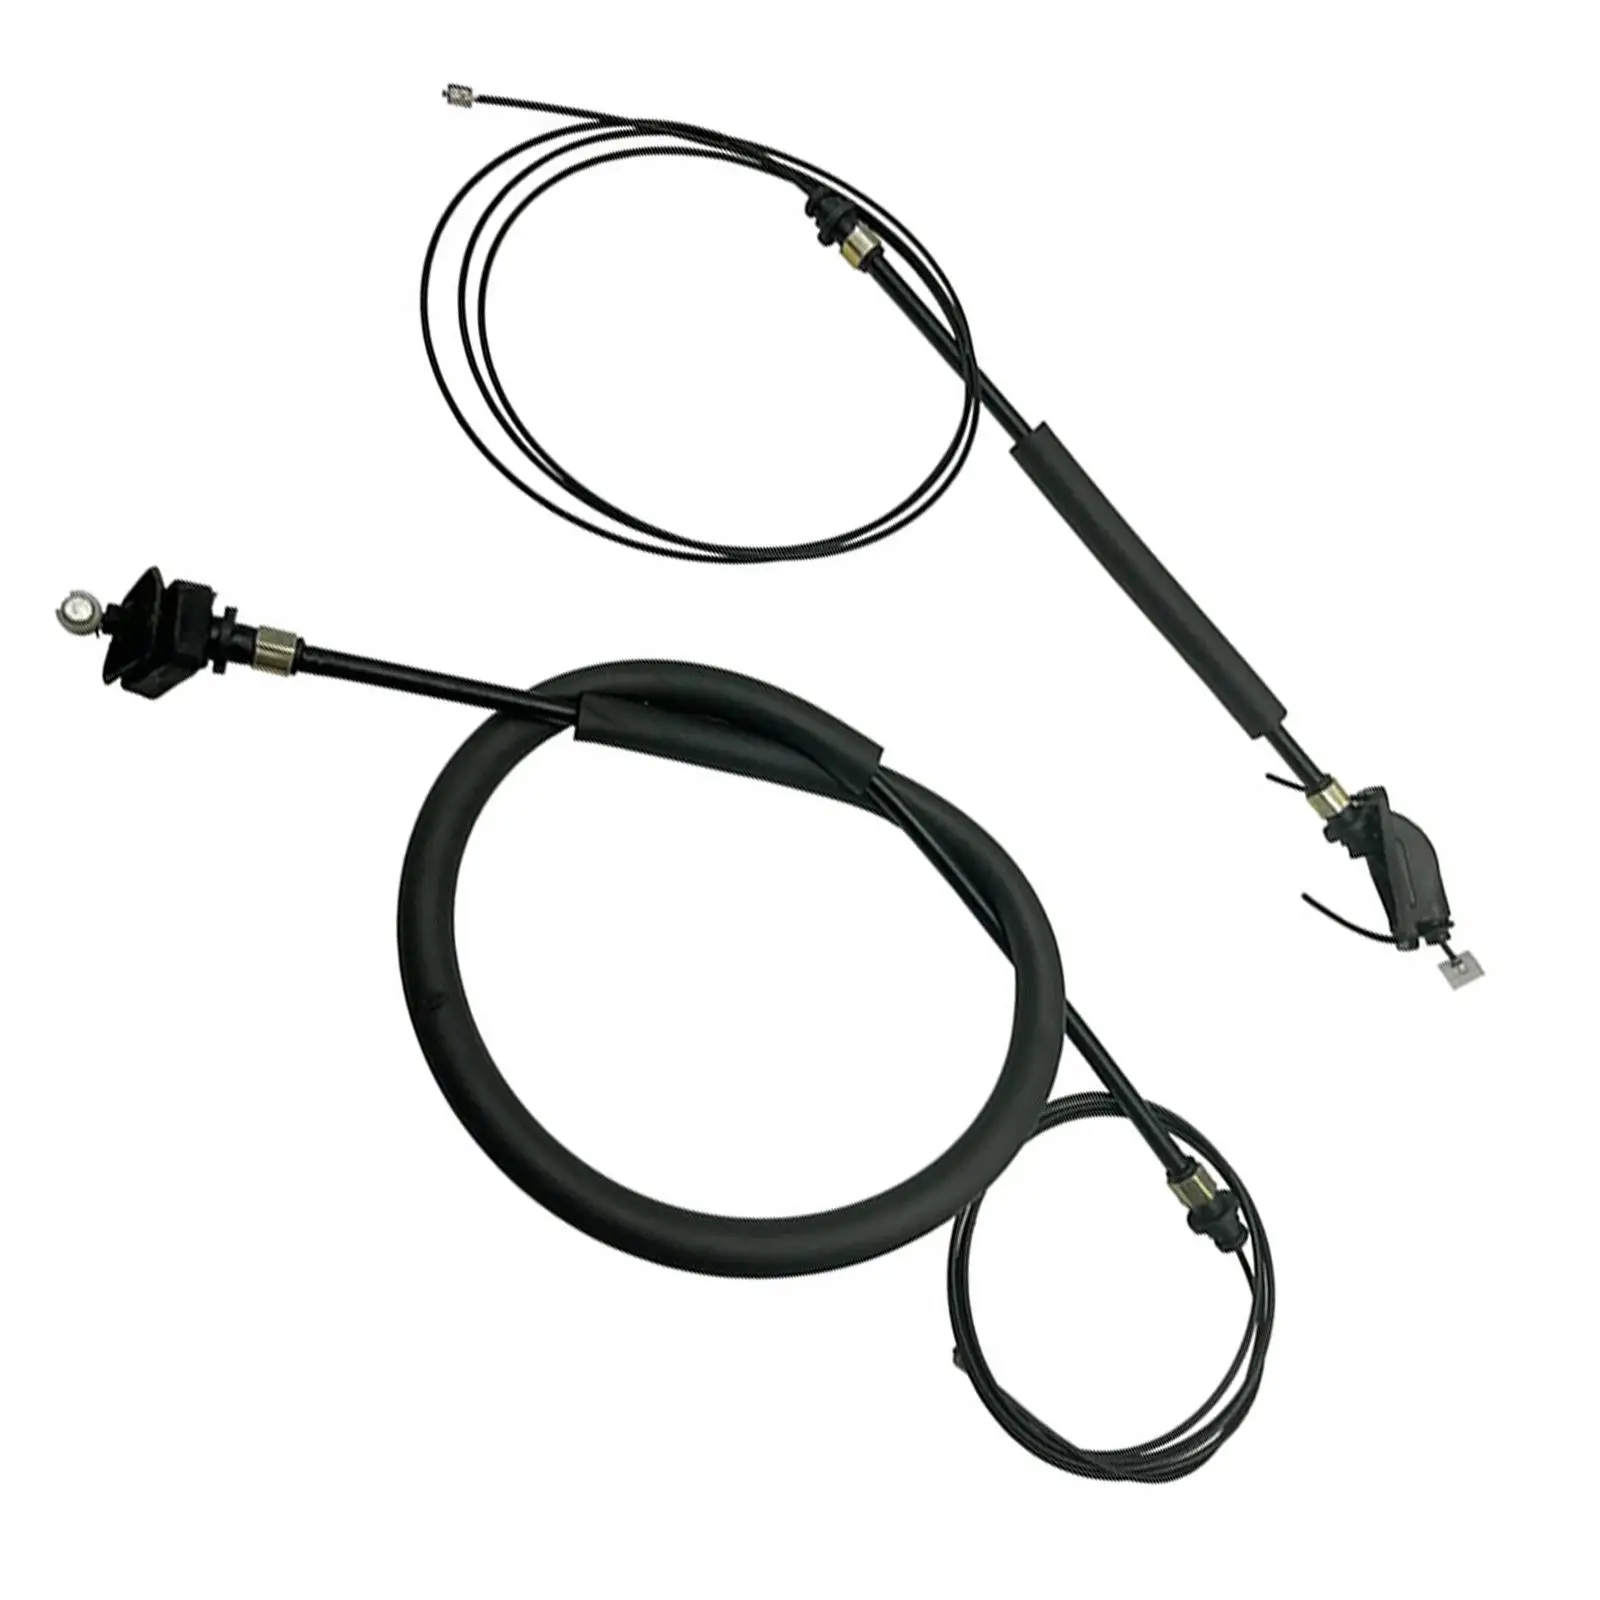 Power Sliding Door Cable Kit Metal Accessories for Honda Easily Install